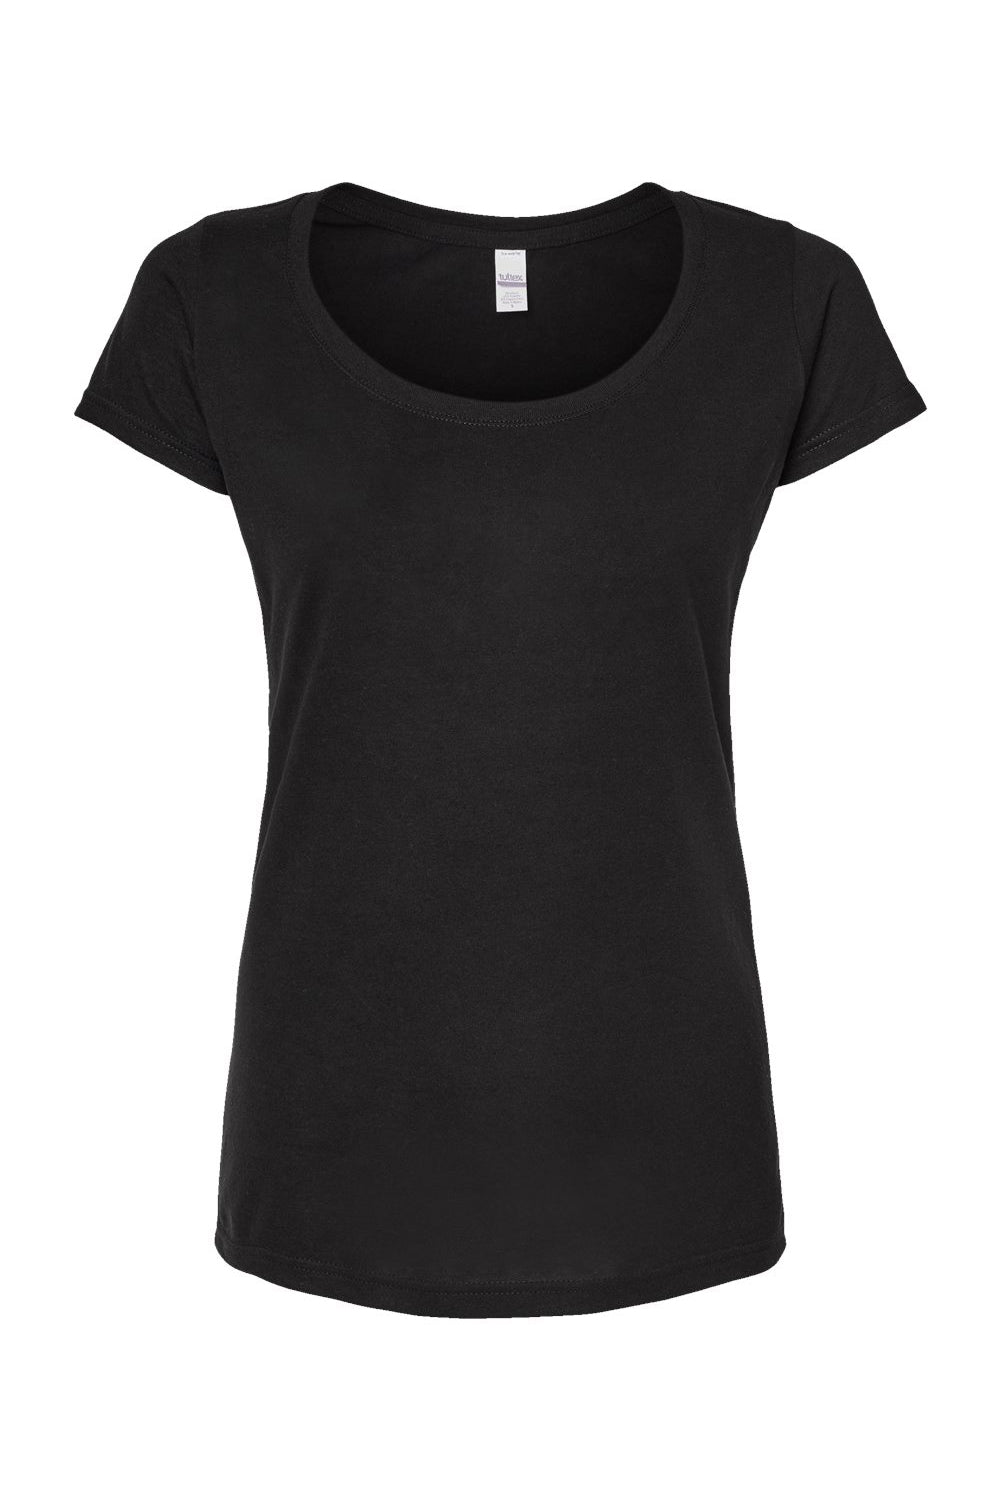 Tultex 243 Womens Poly-Rich Short Sleeve Scoop Neck T-Shirt Black Flat Front